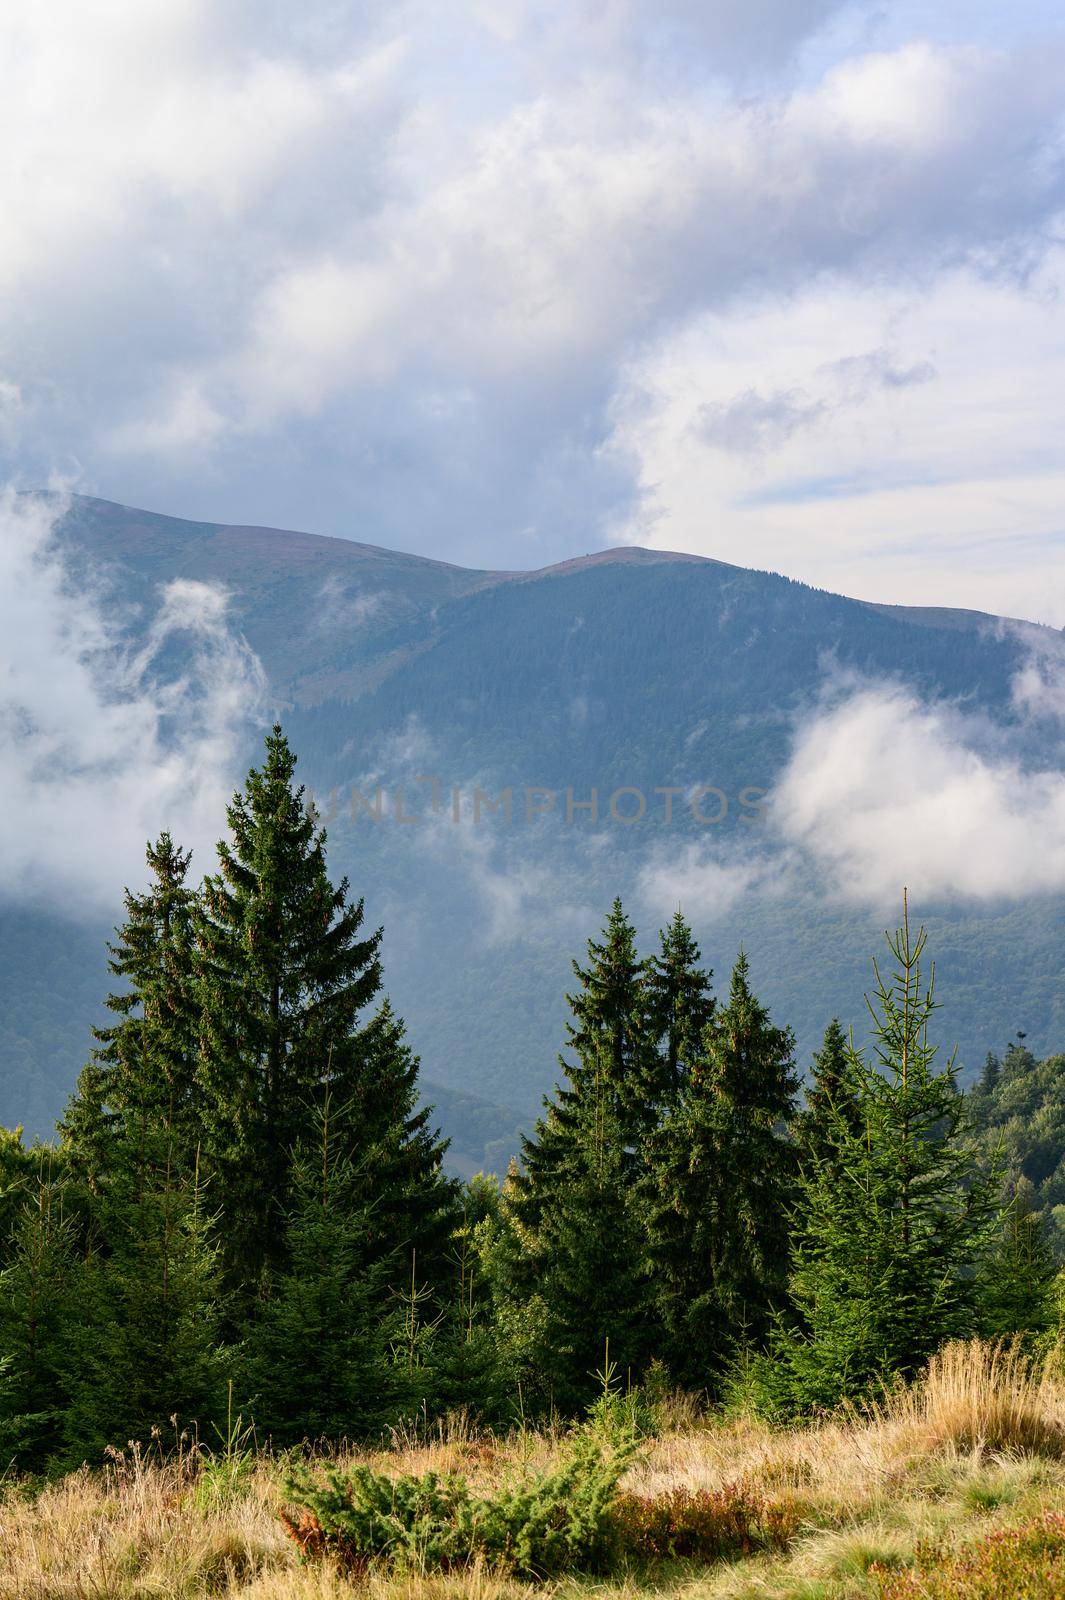 Landscapes of the Ukrainian Carpathians, a trip to the ridges of the mountains in Ukraine. by Niko_Cingaryuk